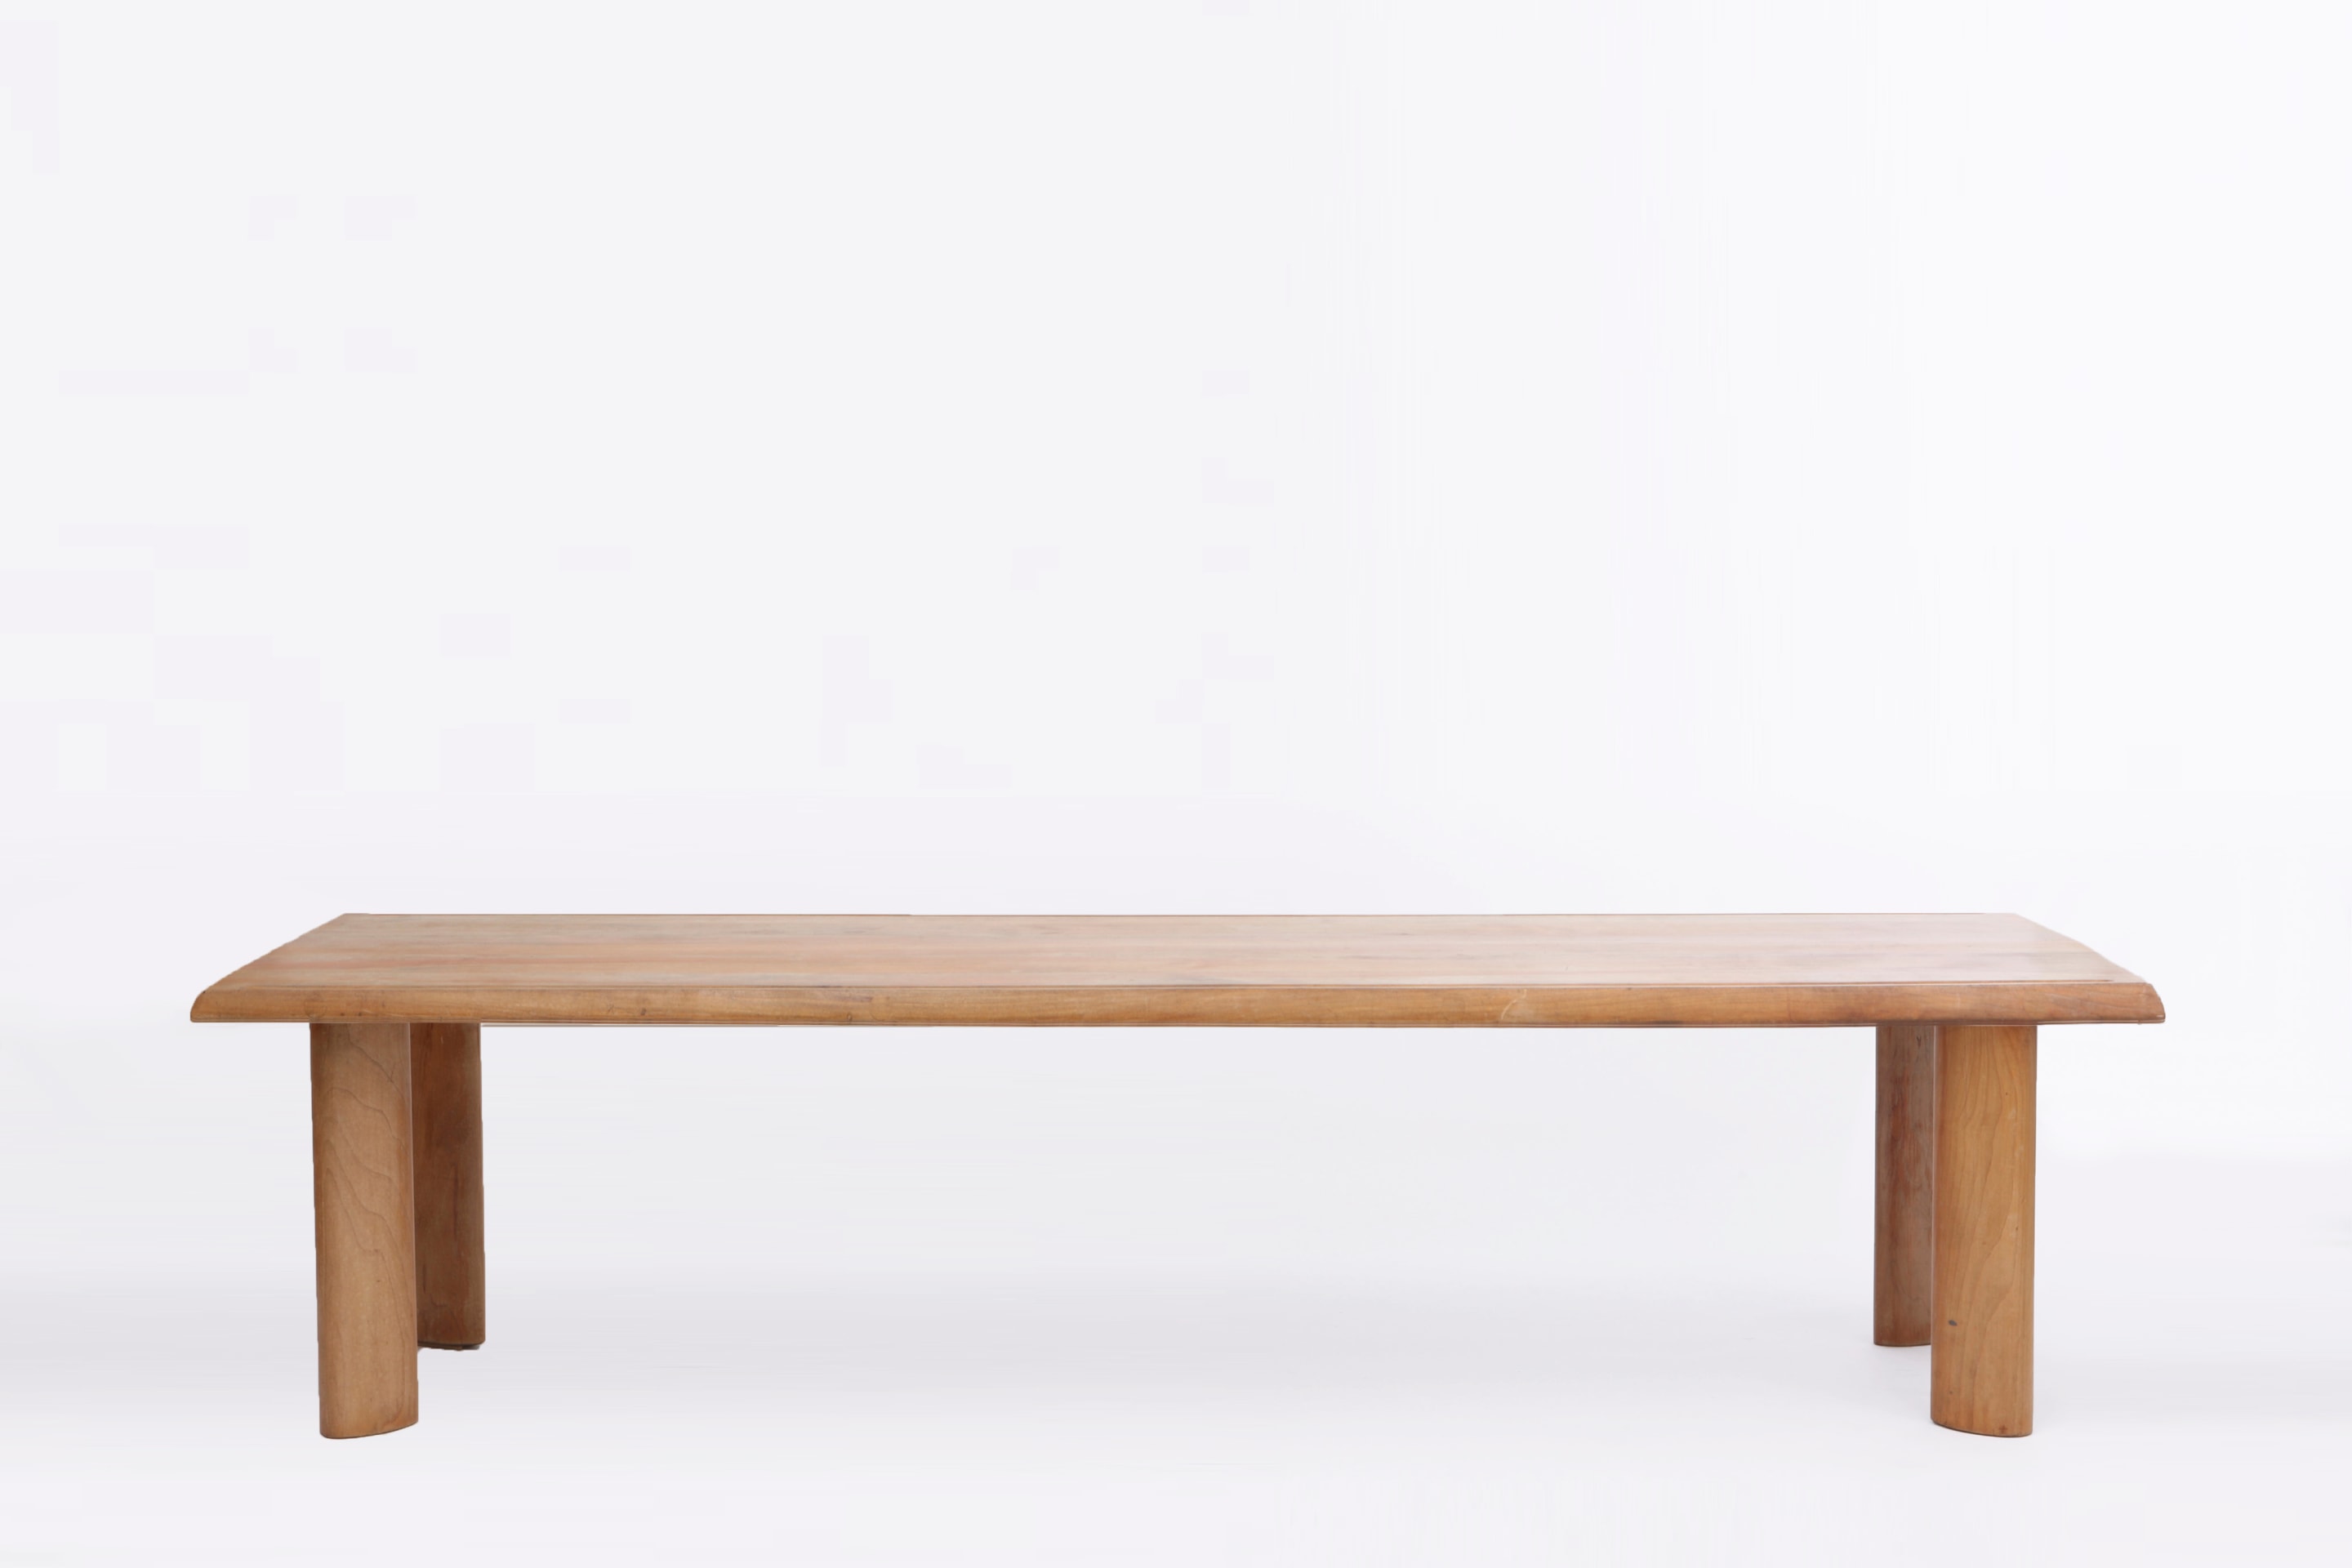 Charlotte Perriand (1903-1999) Bench